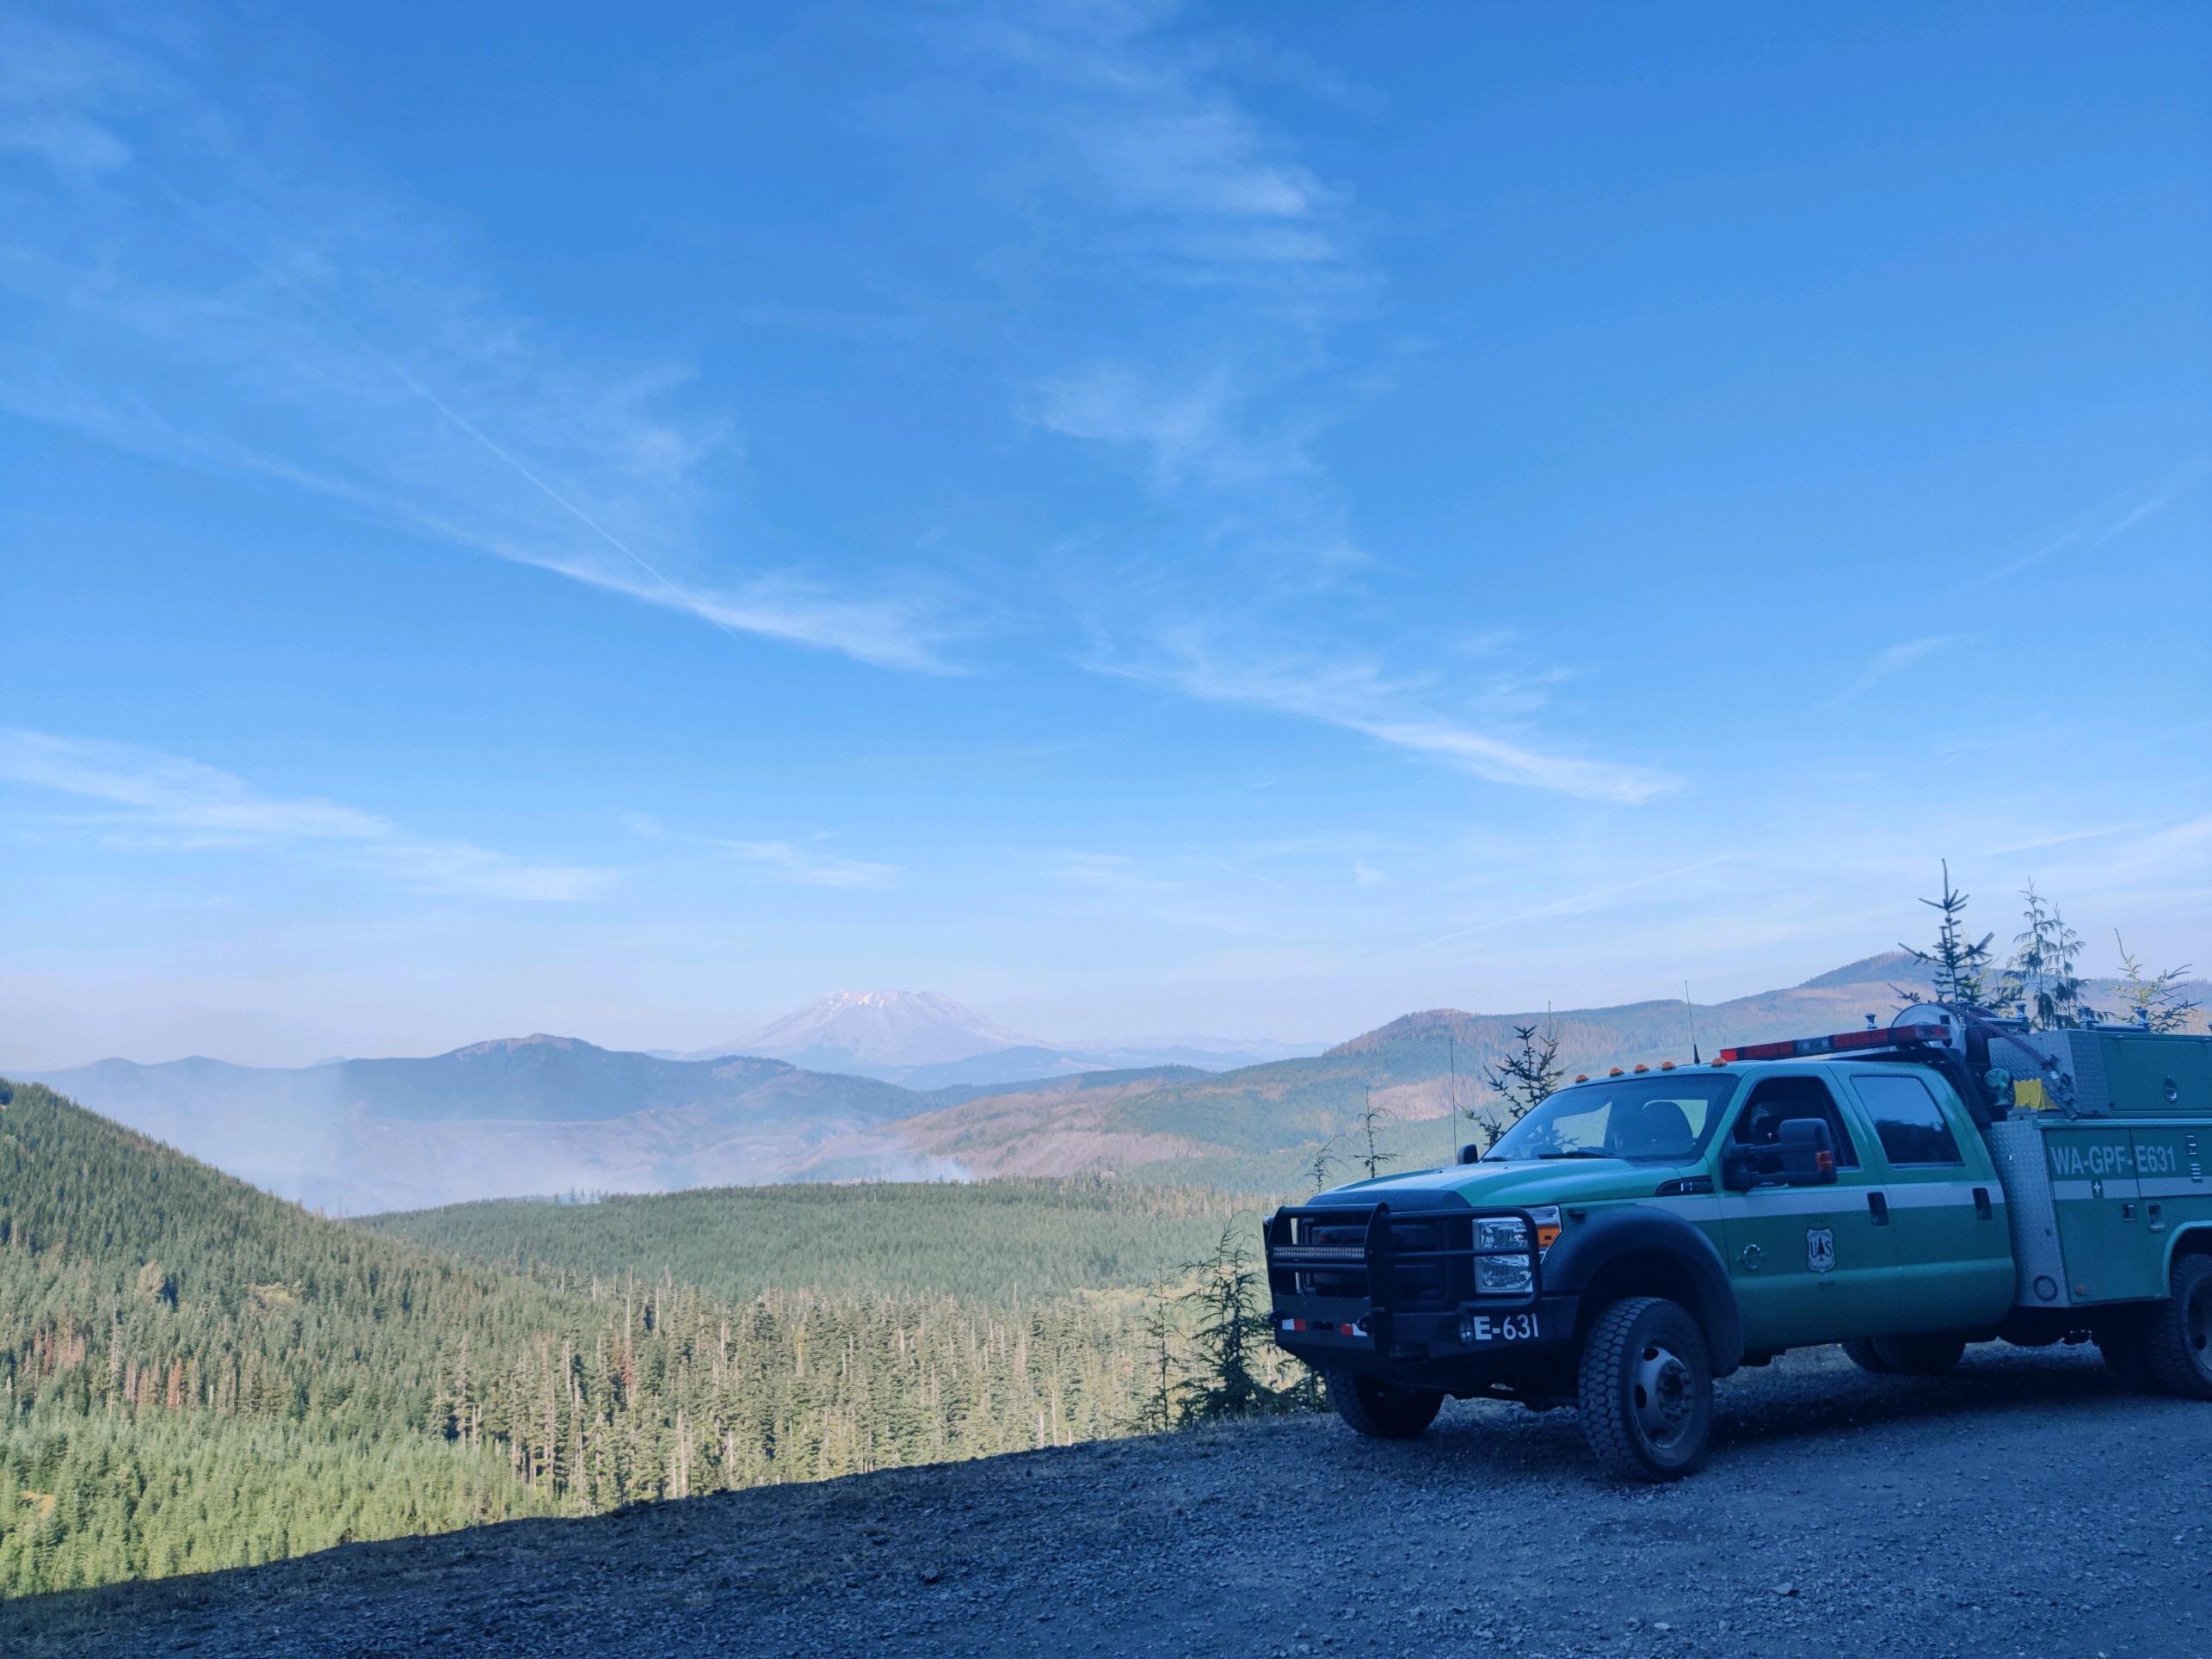 A fire engine on a ridge above Siouxon Fire- smoke is seen in the distance among the green forest below